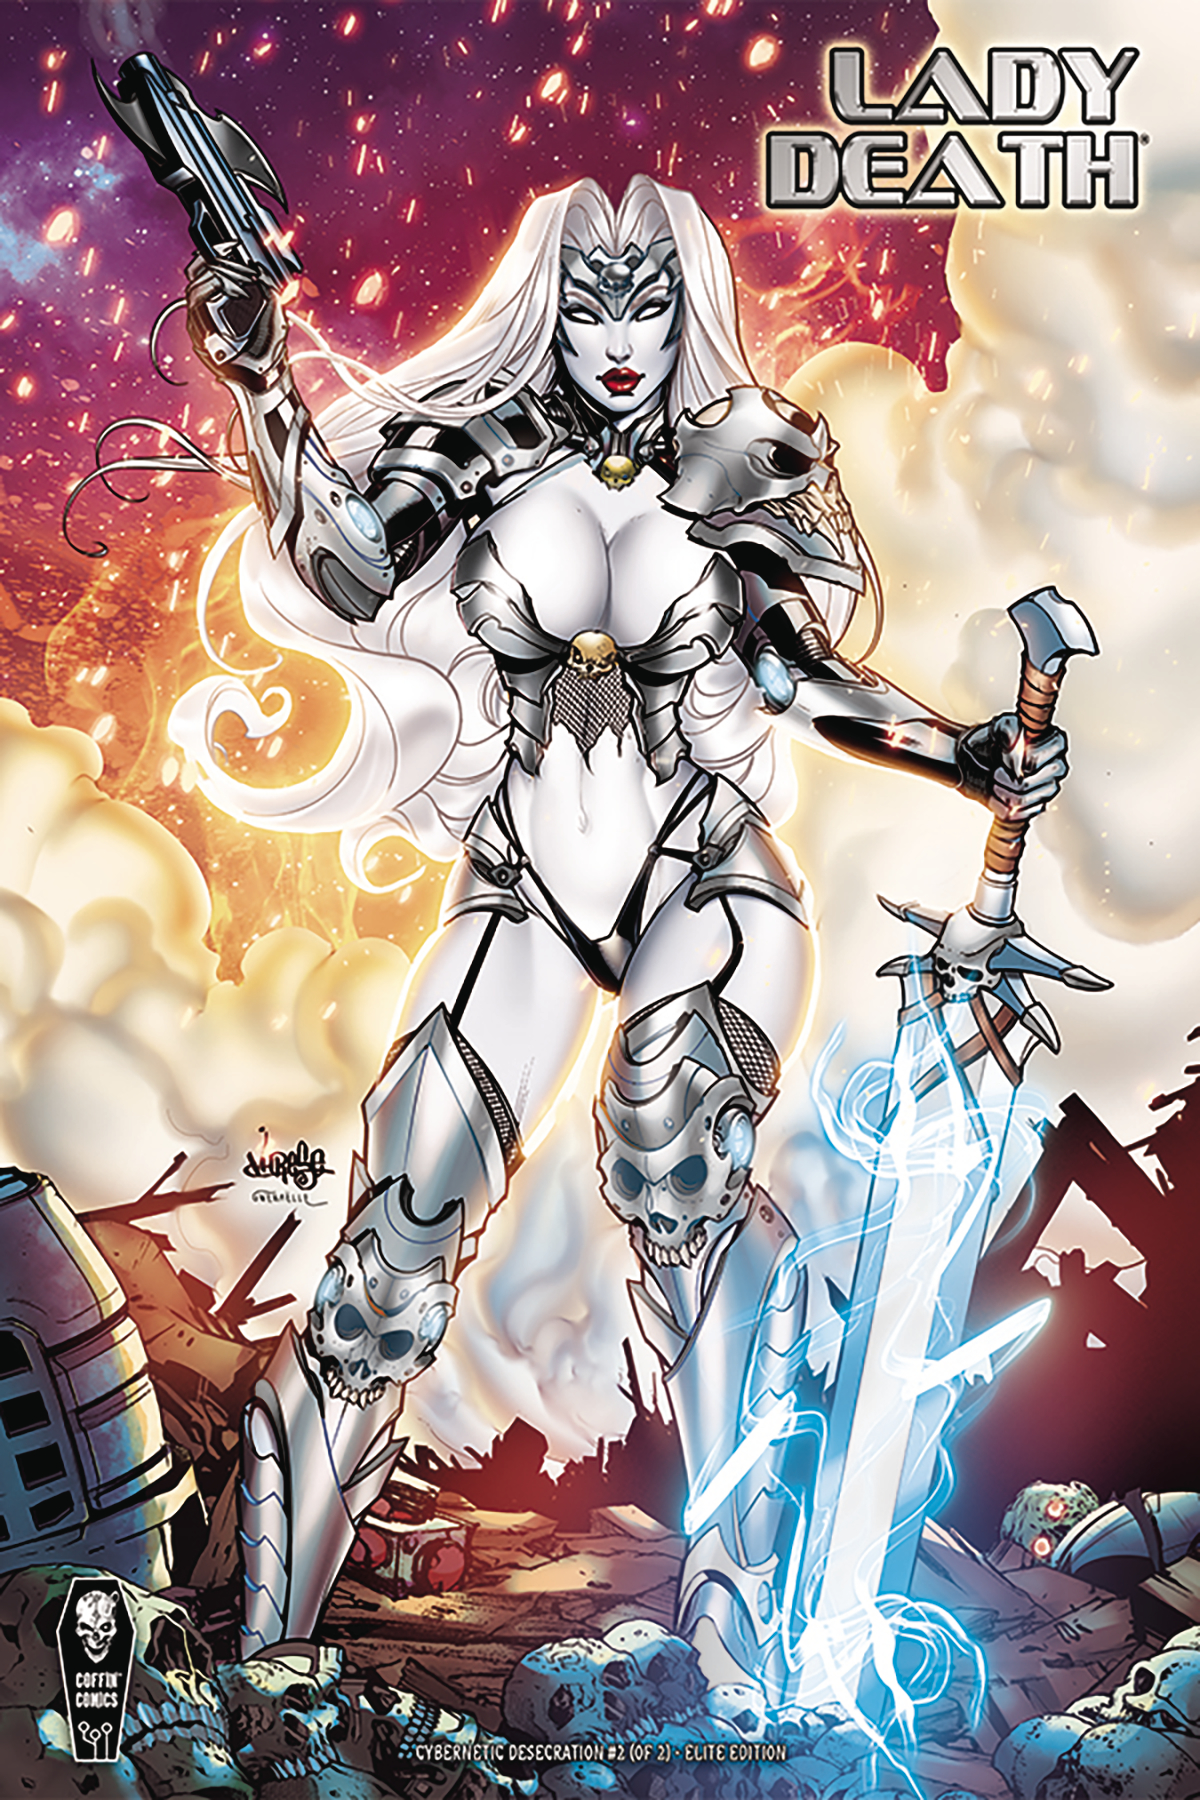 Lady Death Cybernetic Desecration #2 Cover E 1 for 10 Incentive (Mature) (Of 2)